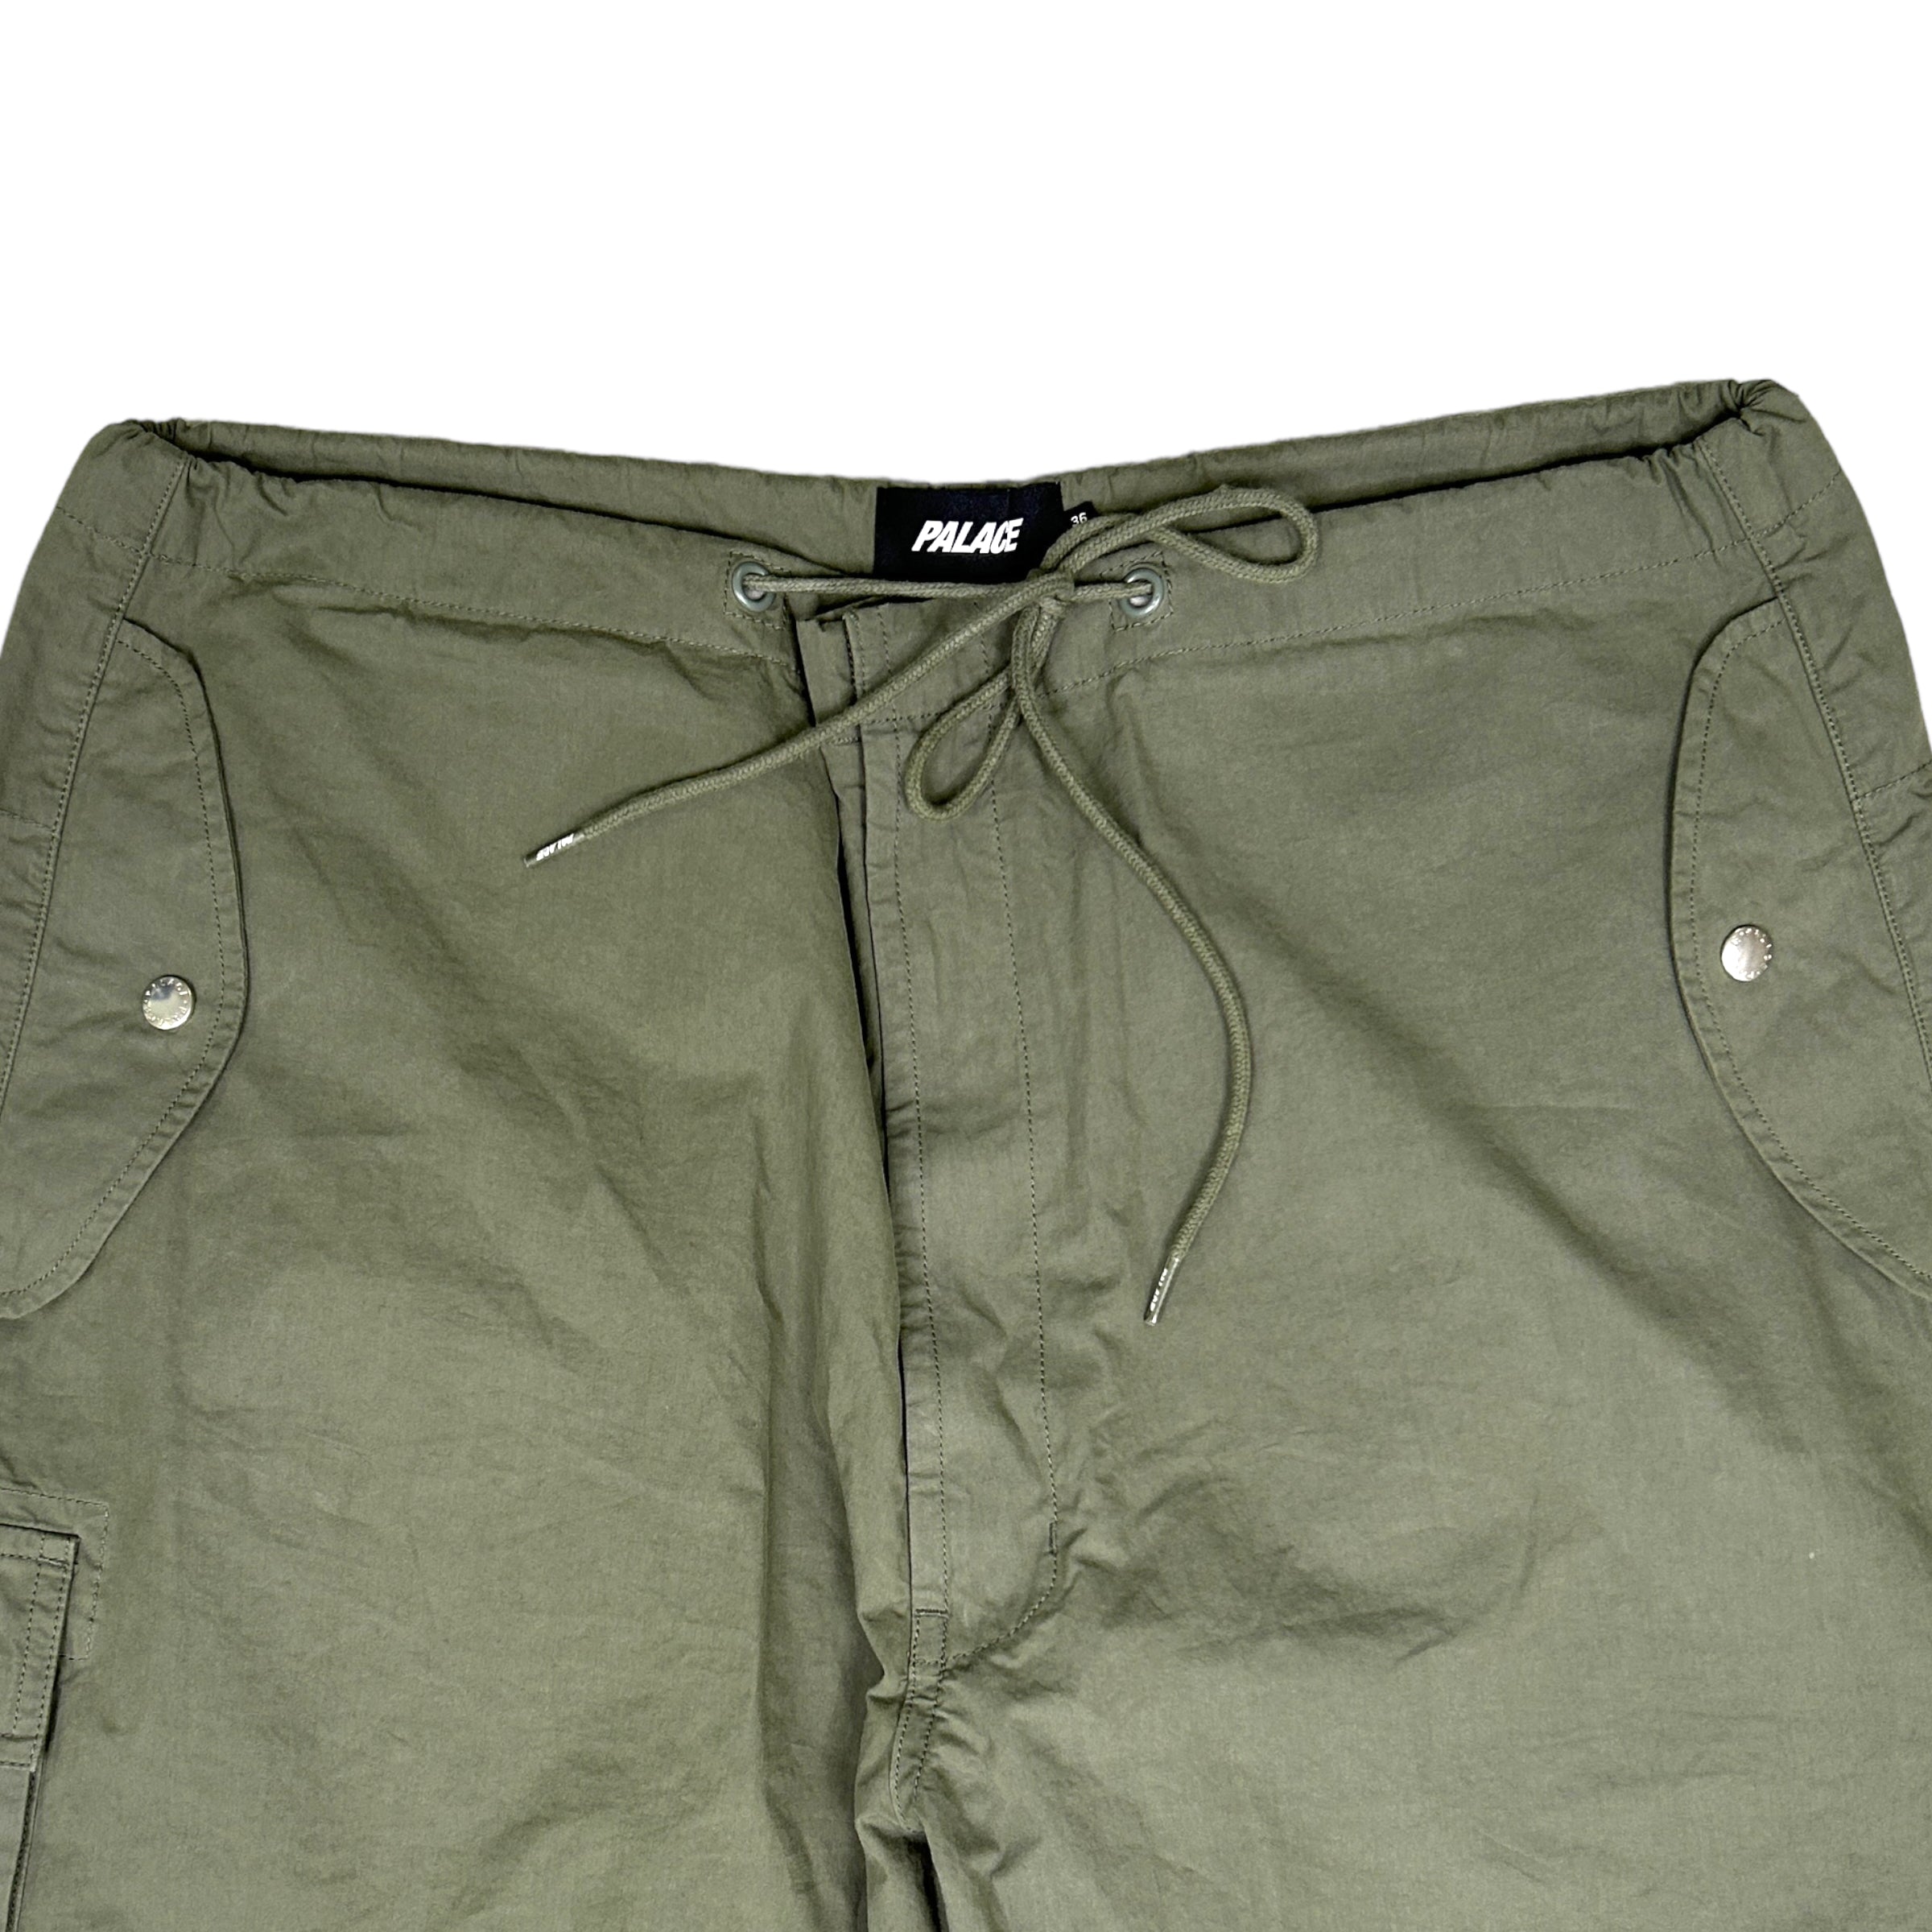 PALACE OVER TROUSERS - OLIVE